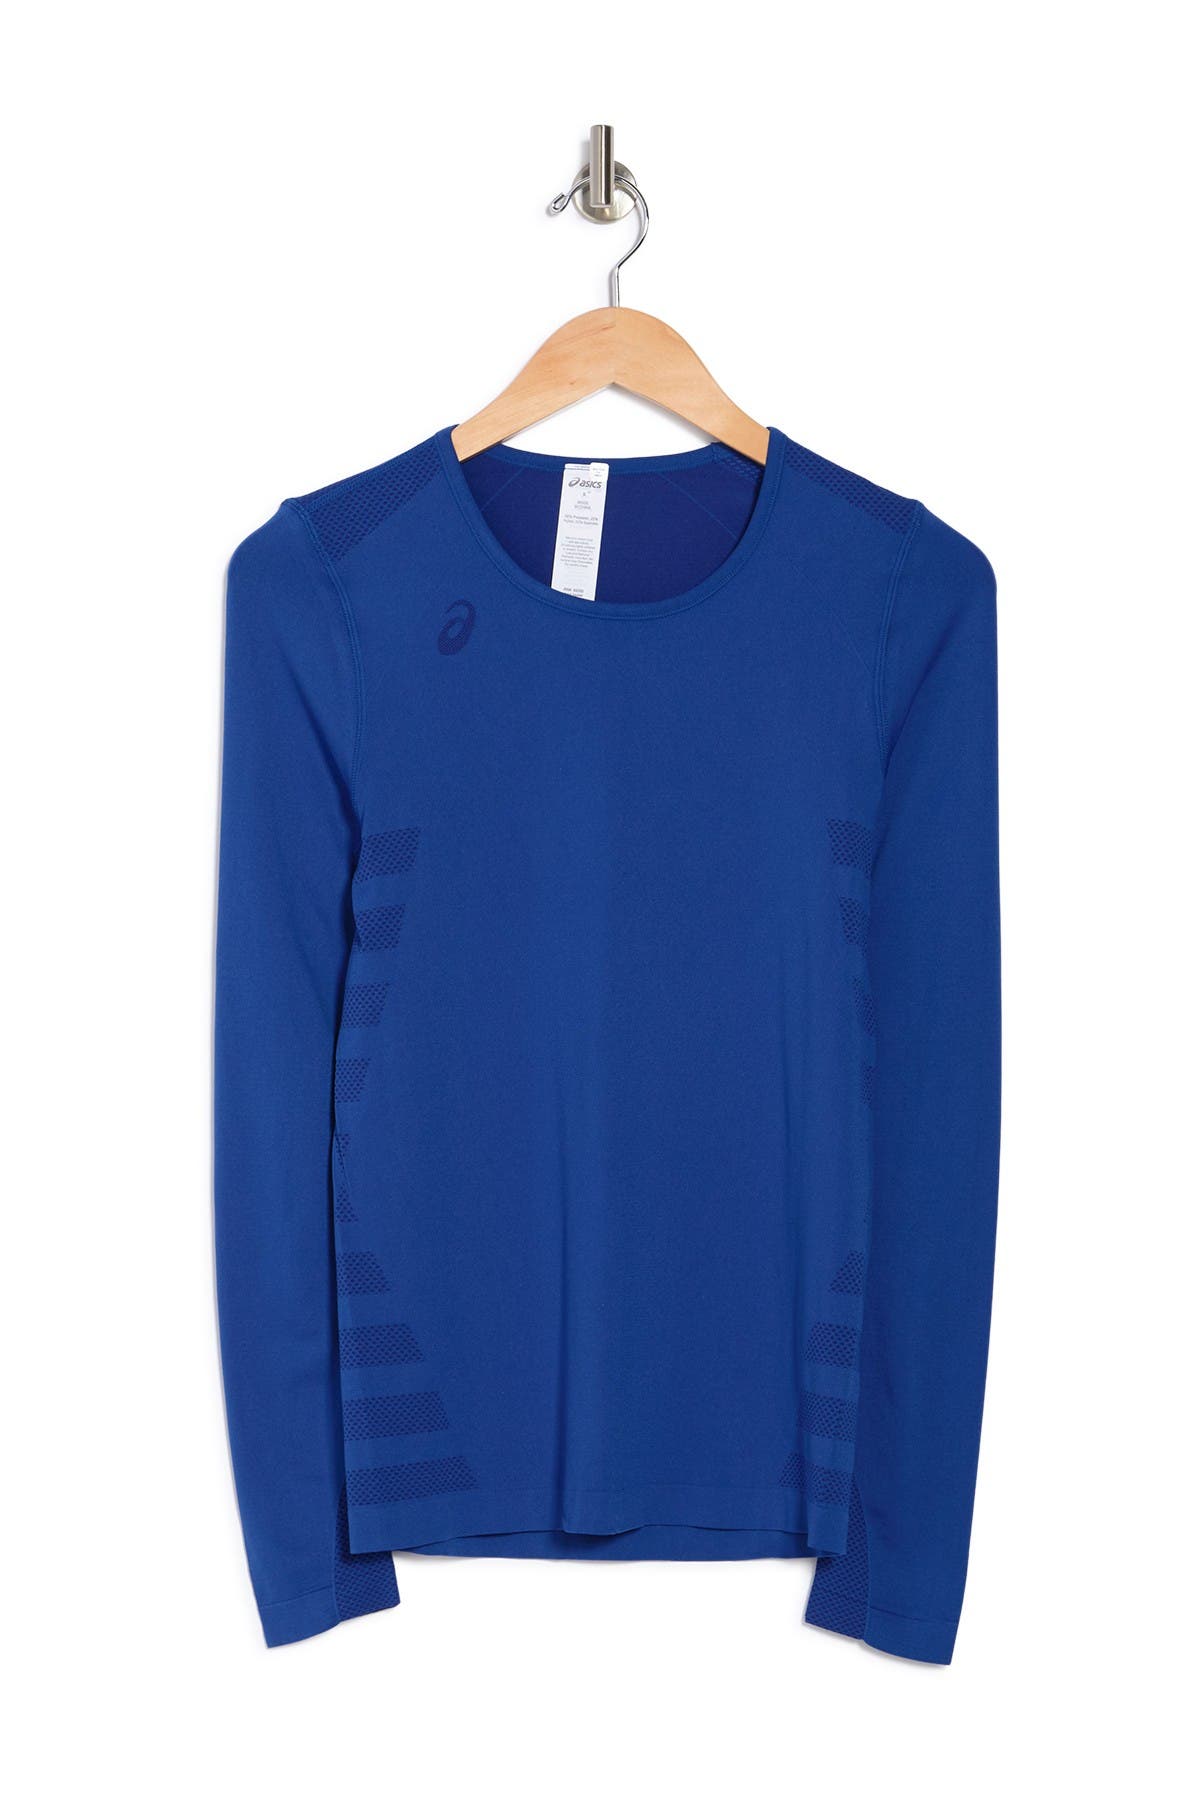 Asics Tactic Court Long Sleeve Jersey In Royal